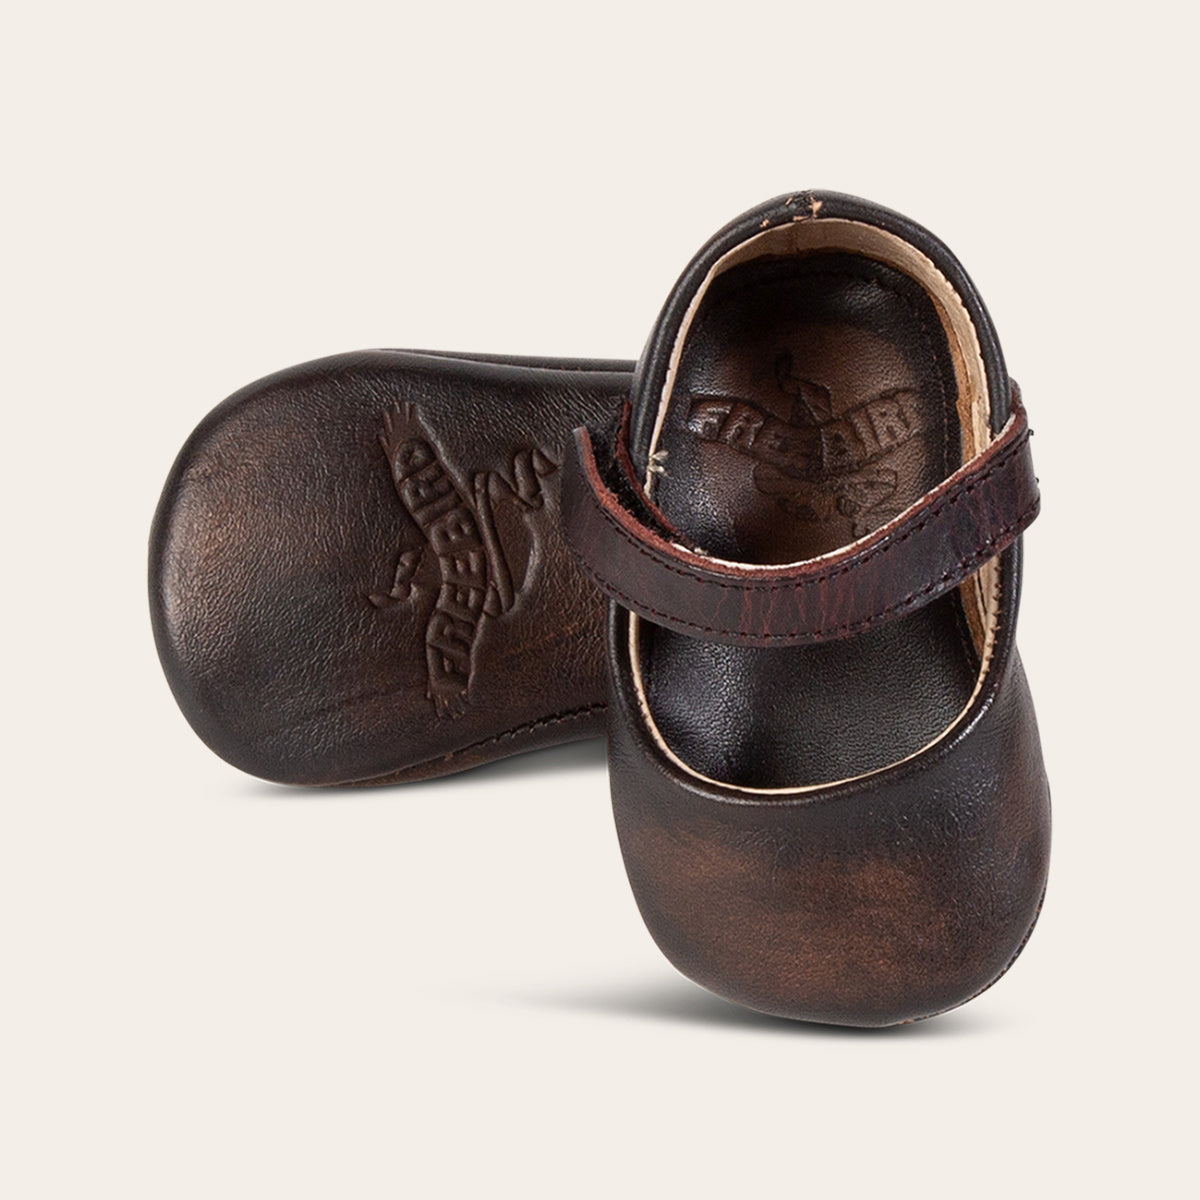 front view showing top leather strap and soft leather imprinted sole on FREEBIRD infant baby jane black distressed leather shoe